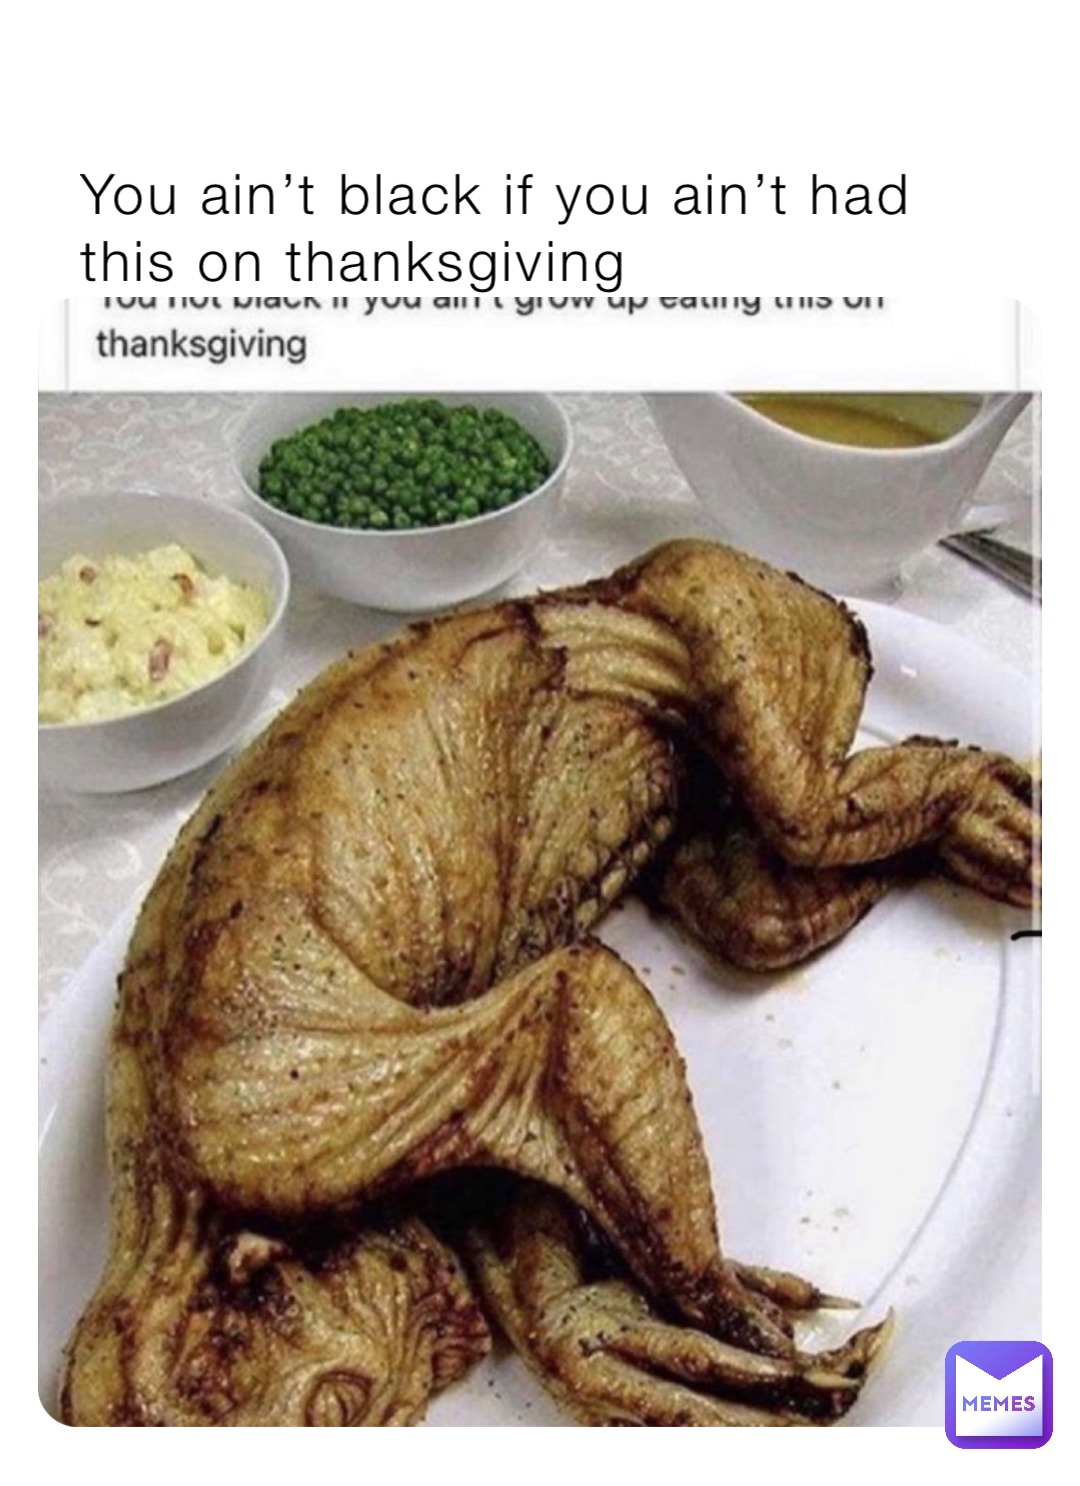 You ain’t black if you ain’t had this on thanksgiving